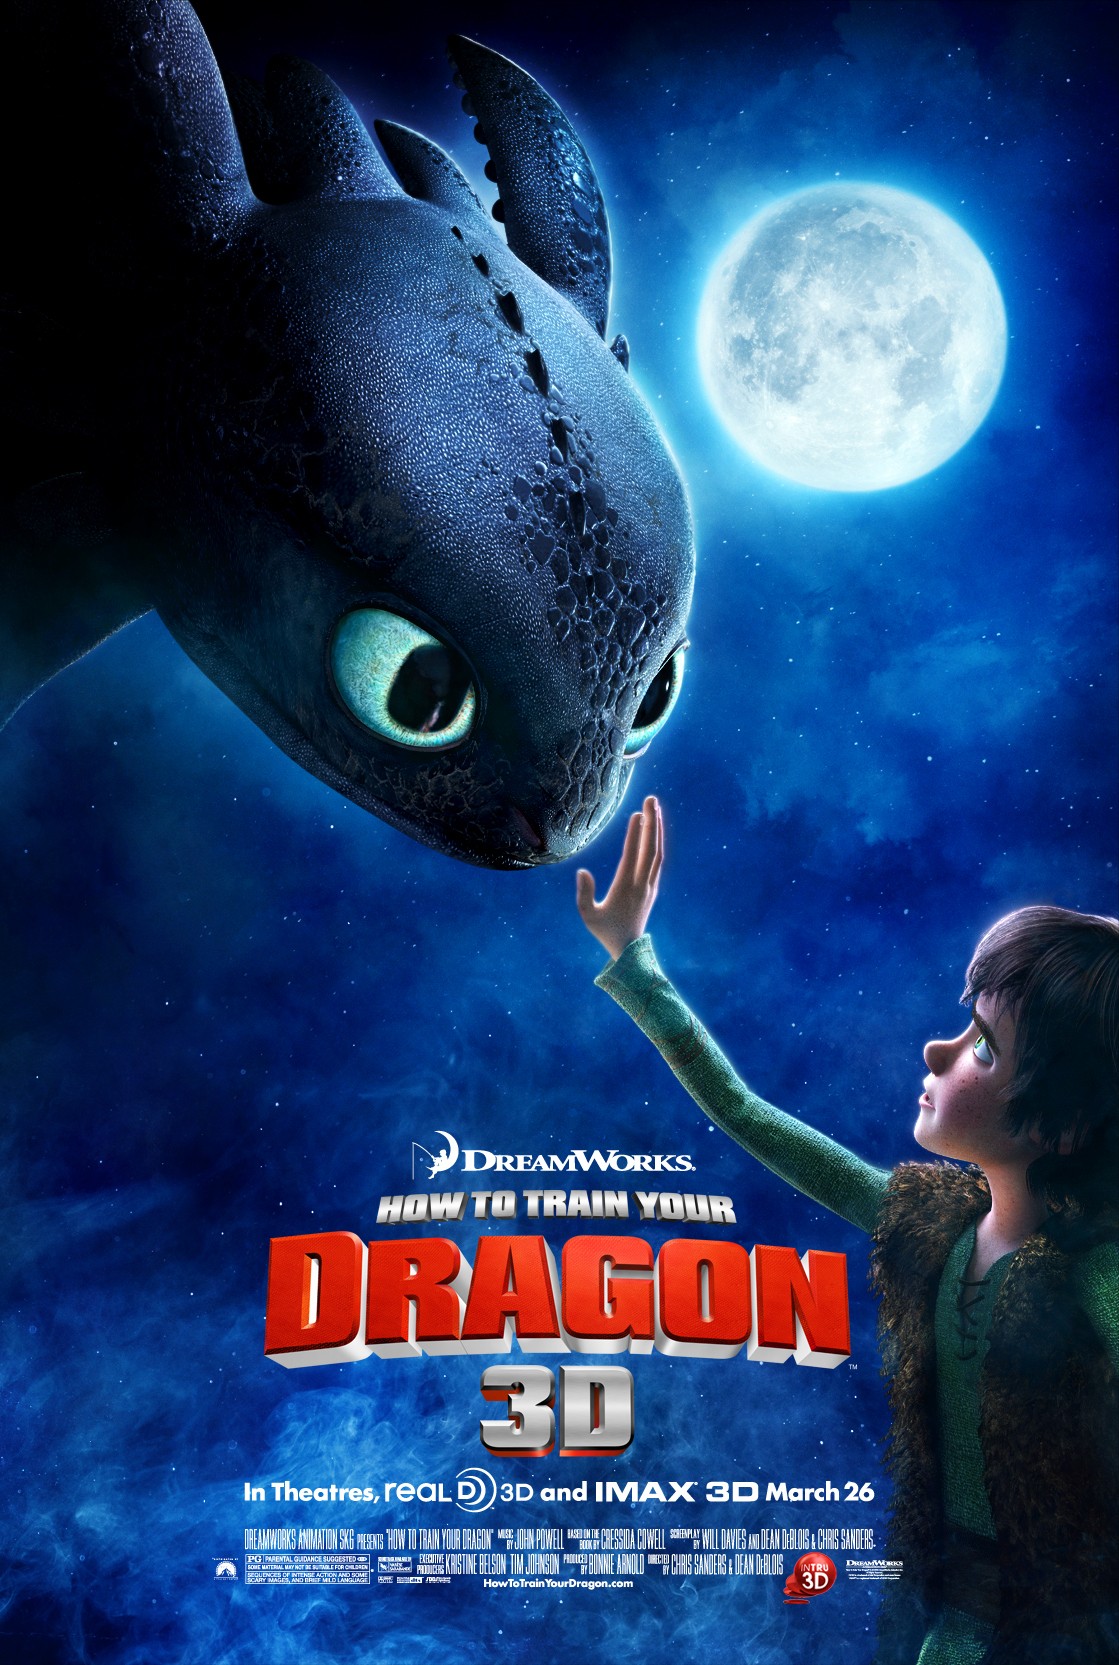 How to Train Your Dragon (2010) 480p BluRay Hindi Dual Audio Movie MSubs [400MB]